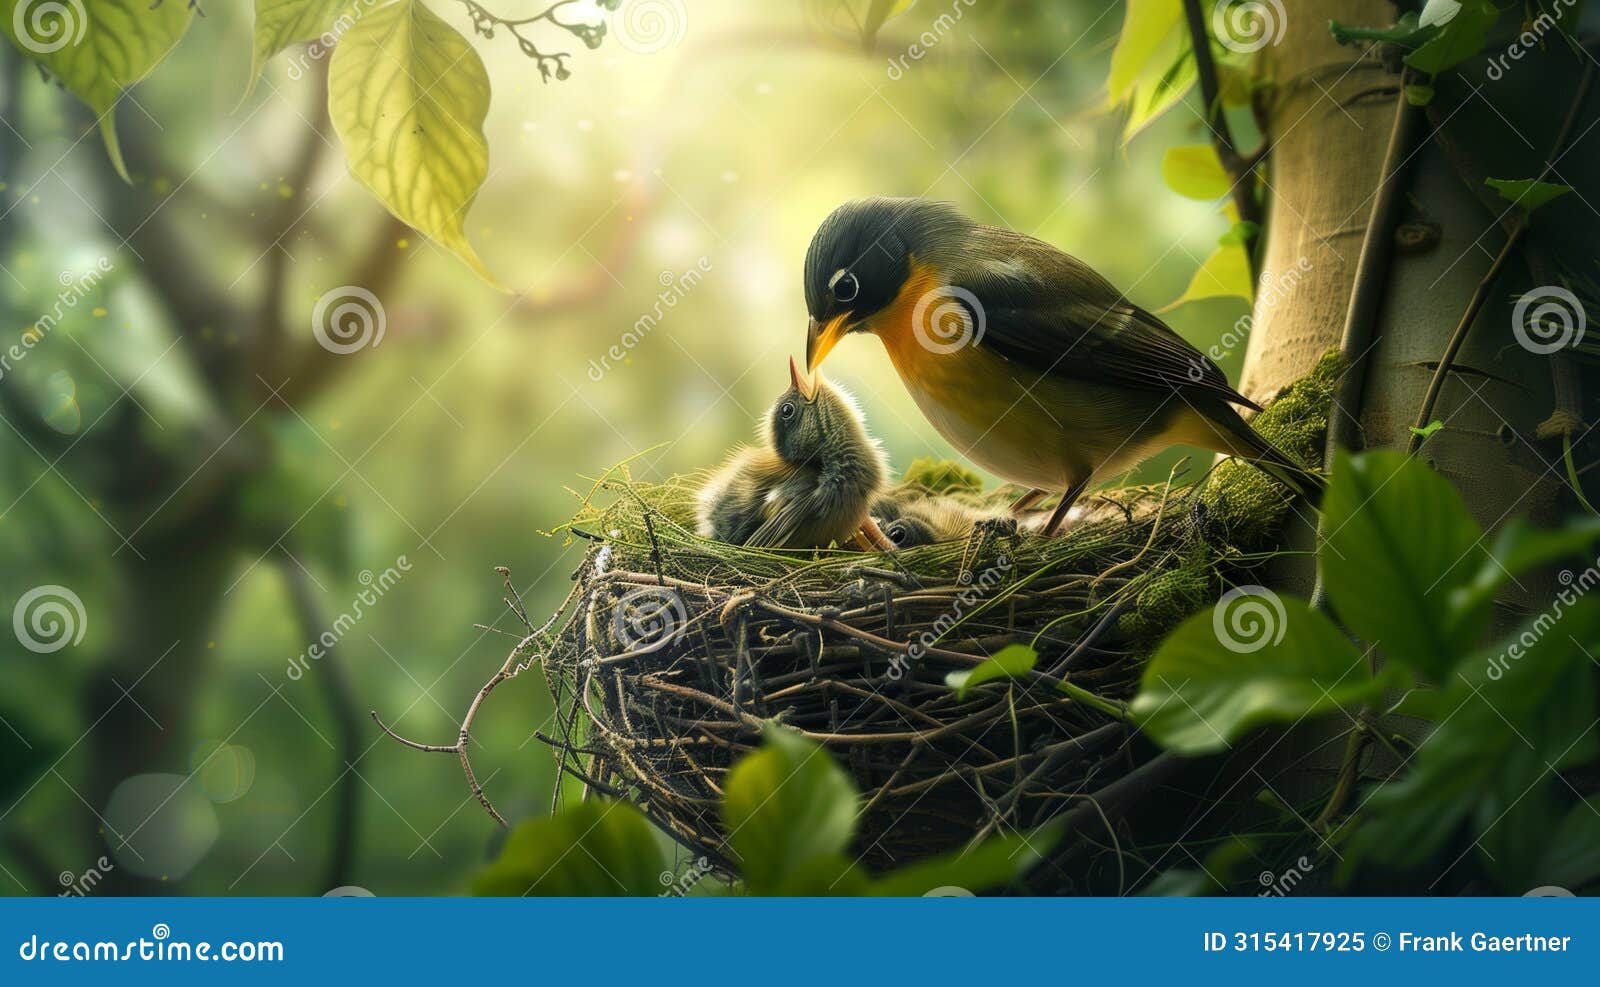 intimate moment of a mother bird nourishing her newborns in the warmth of sunrise